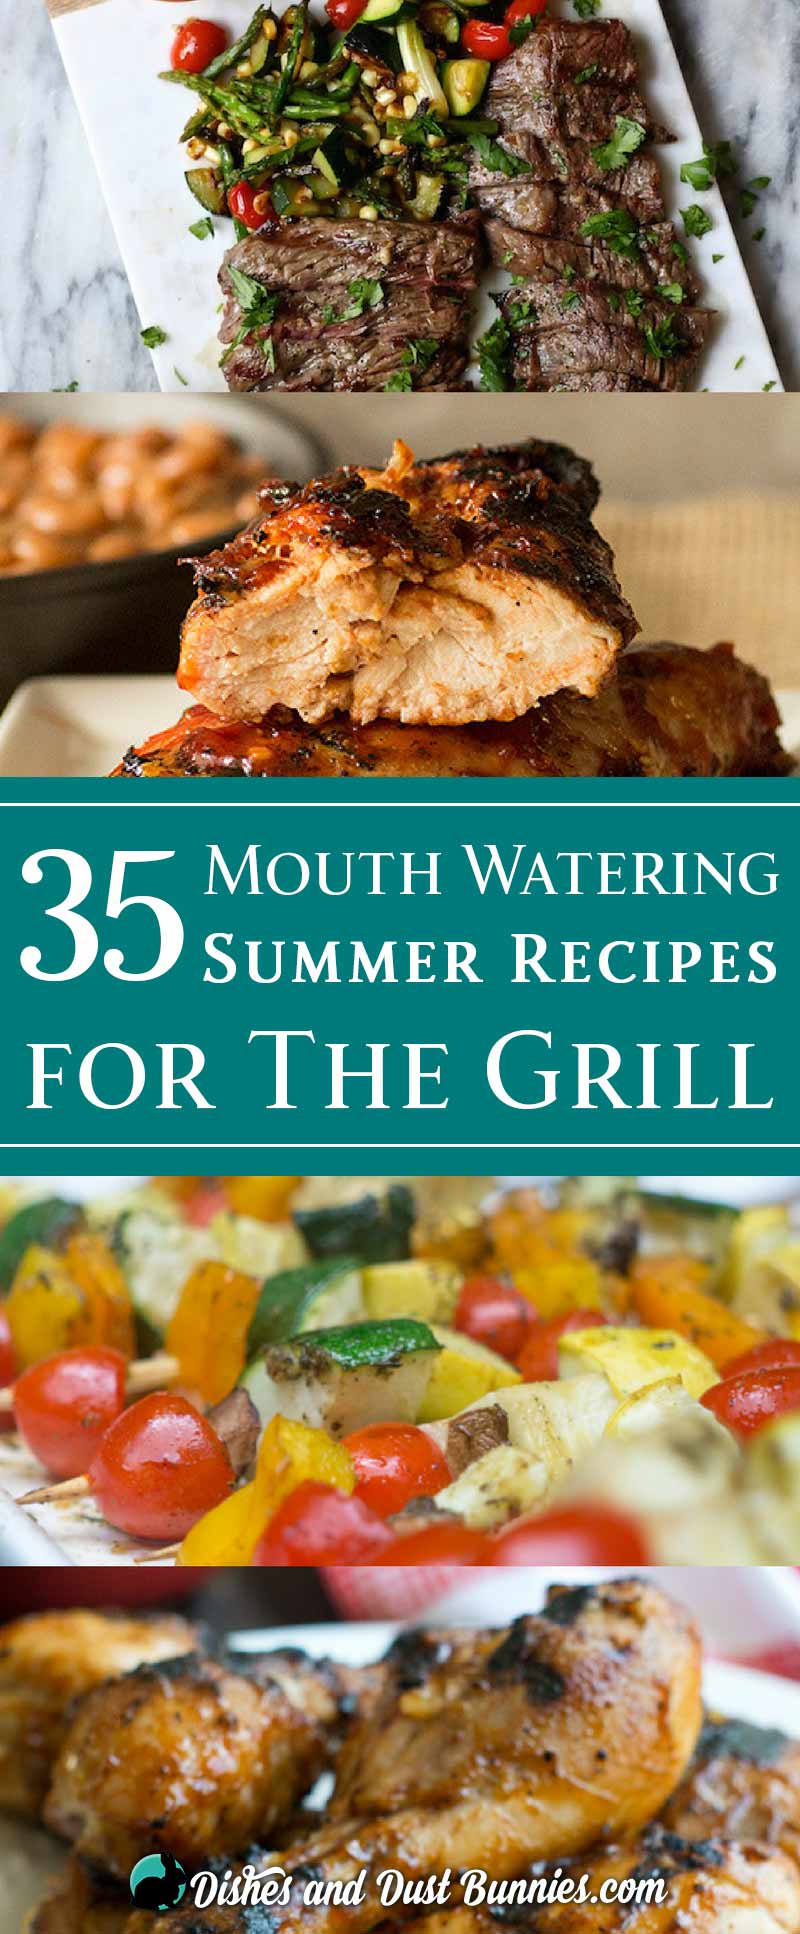 35 Mouth Watering Summer Recipes for the Grill - dishesanddustbunnies.com